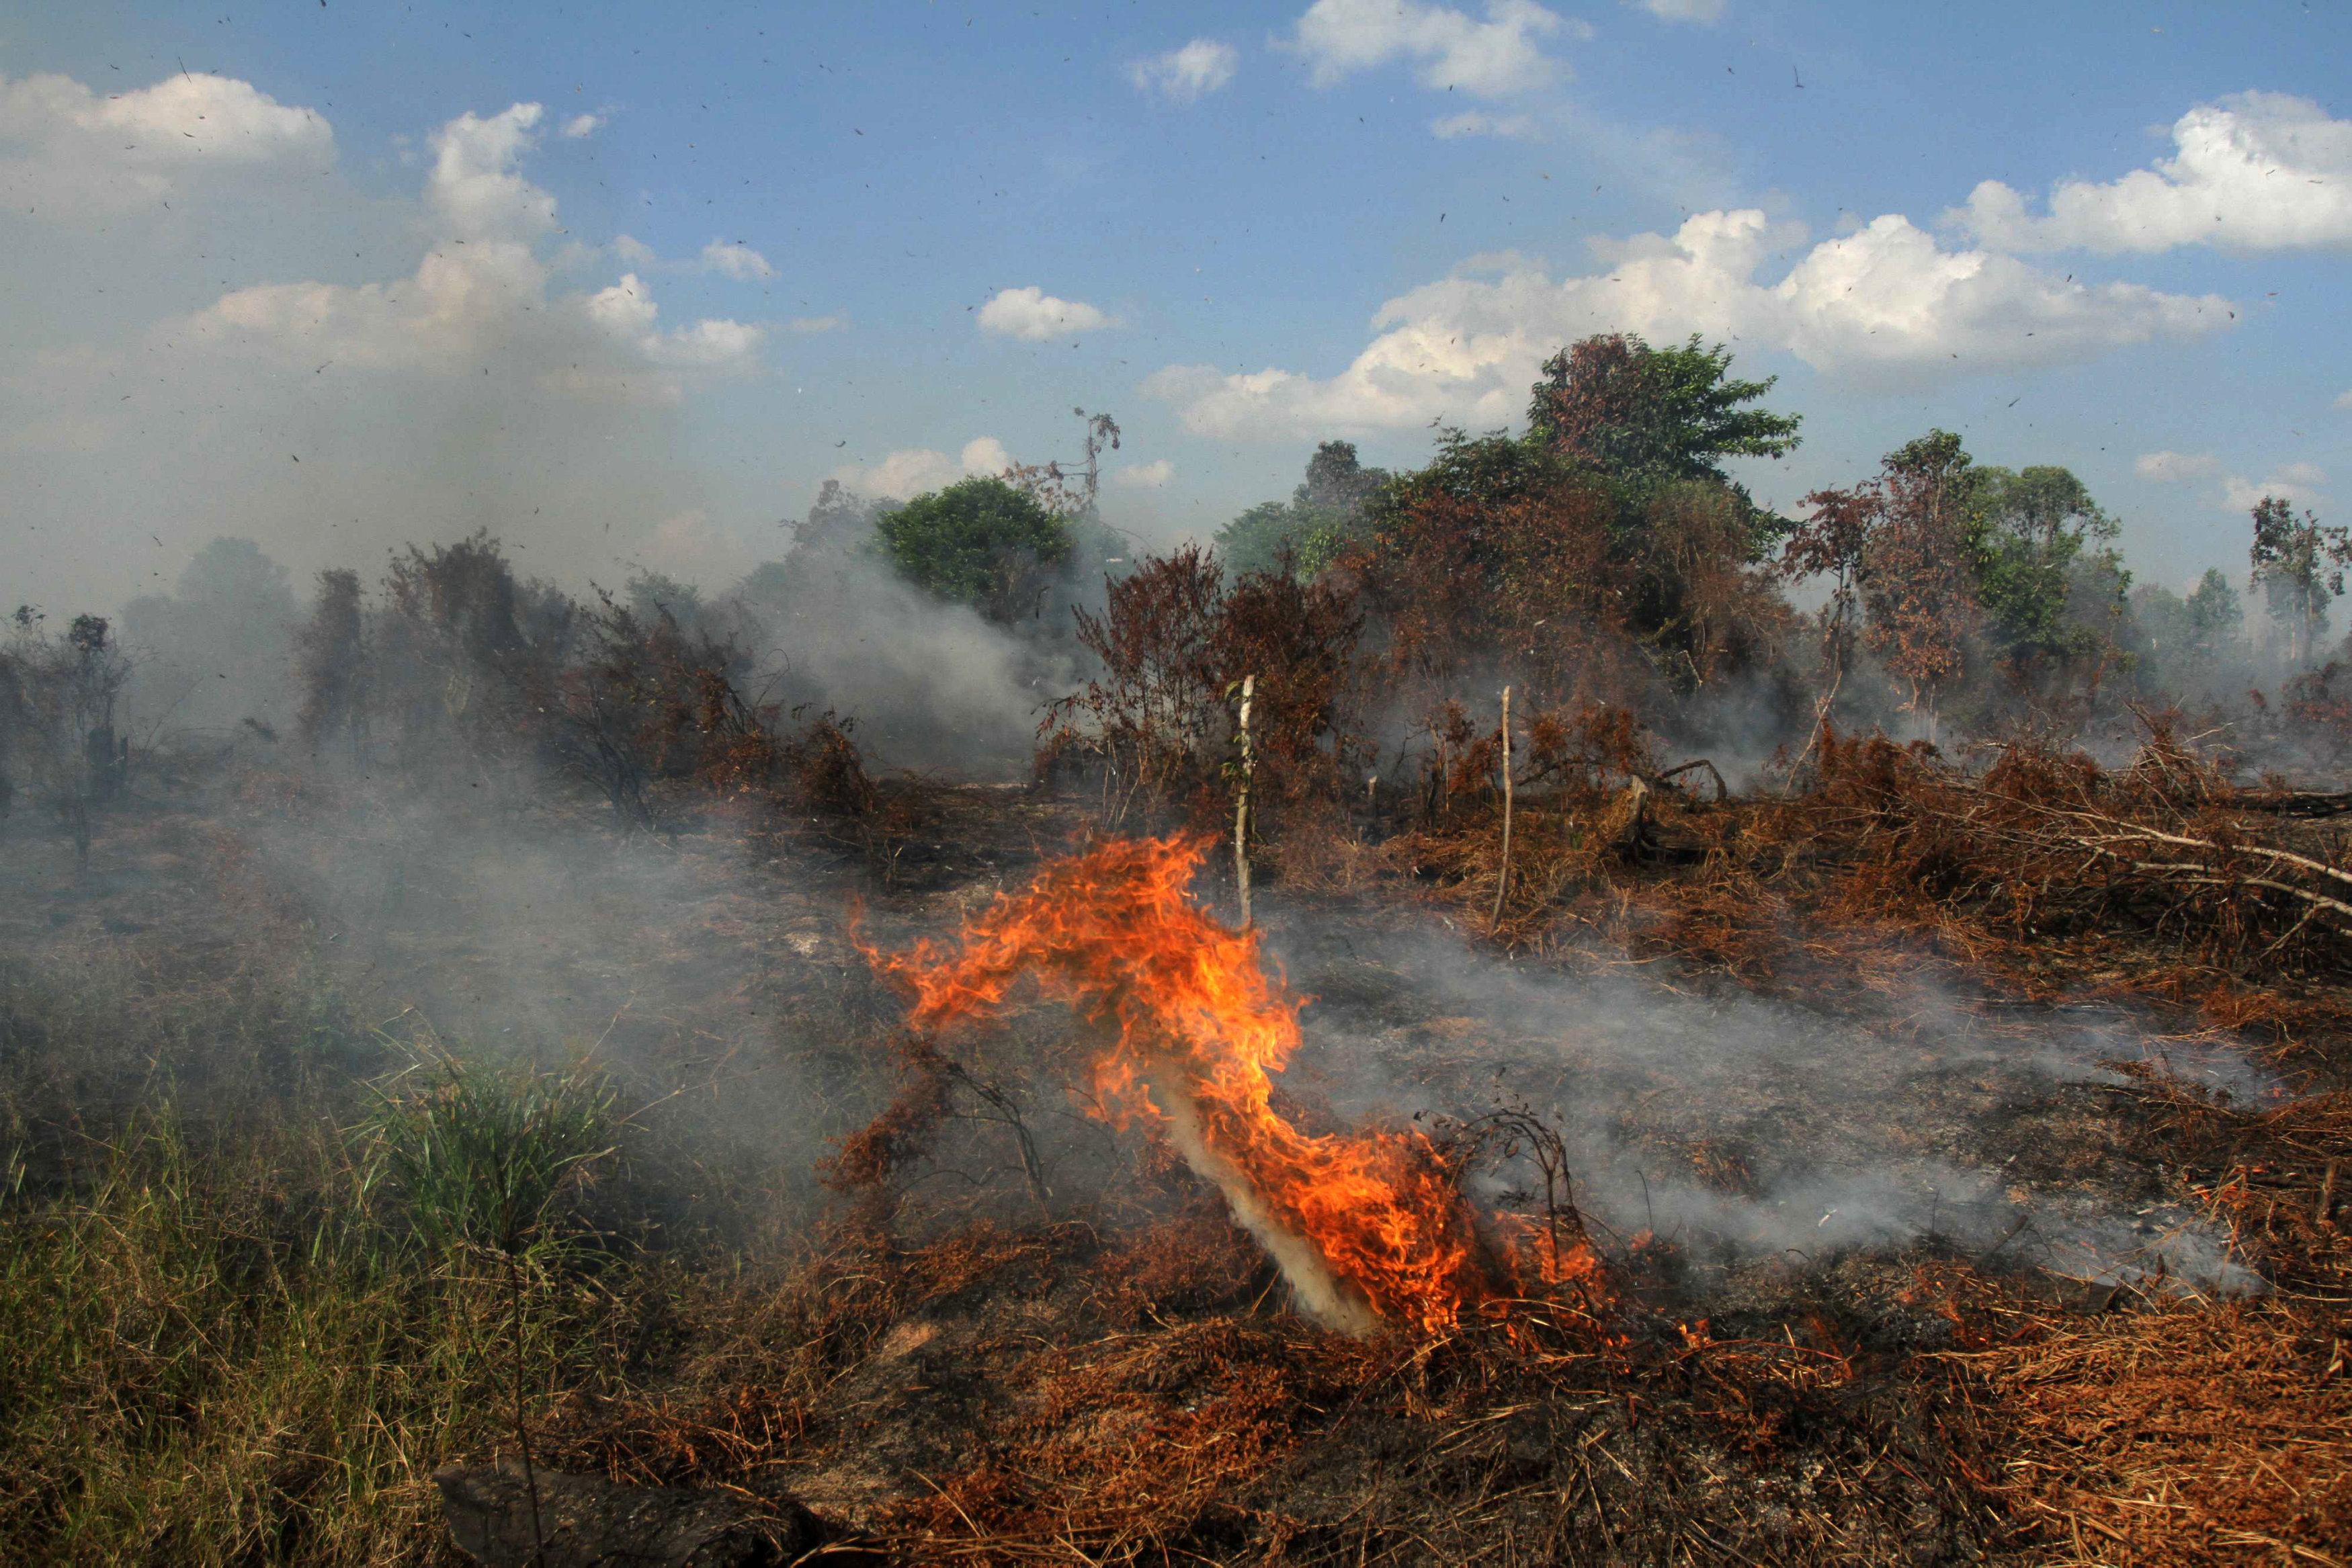 Forest fire threat to escalate, says Indonesia's disaster agency